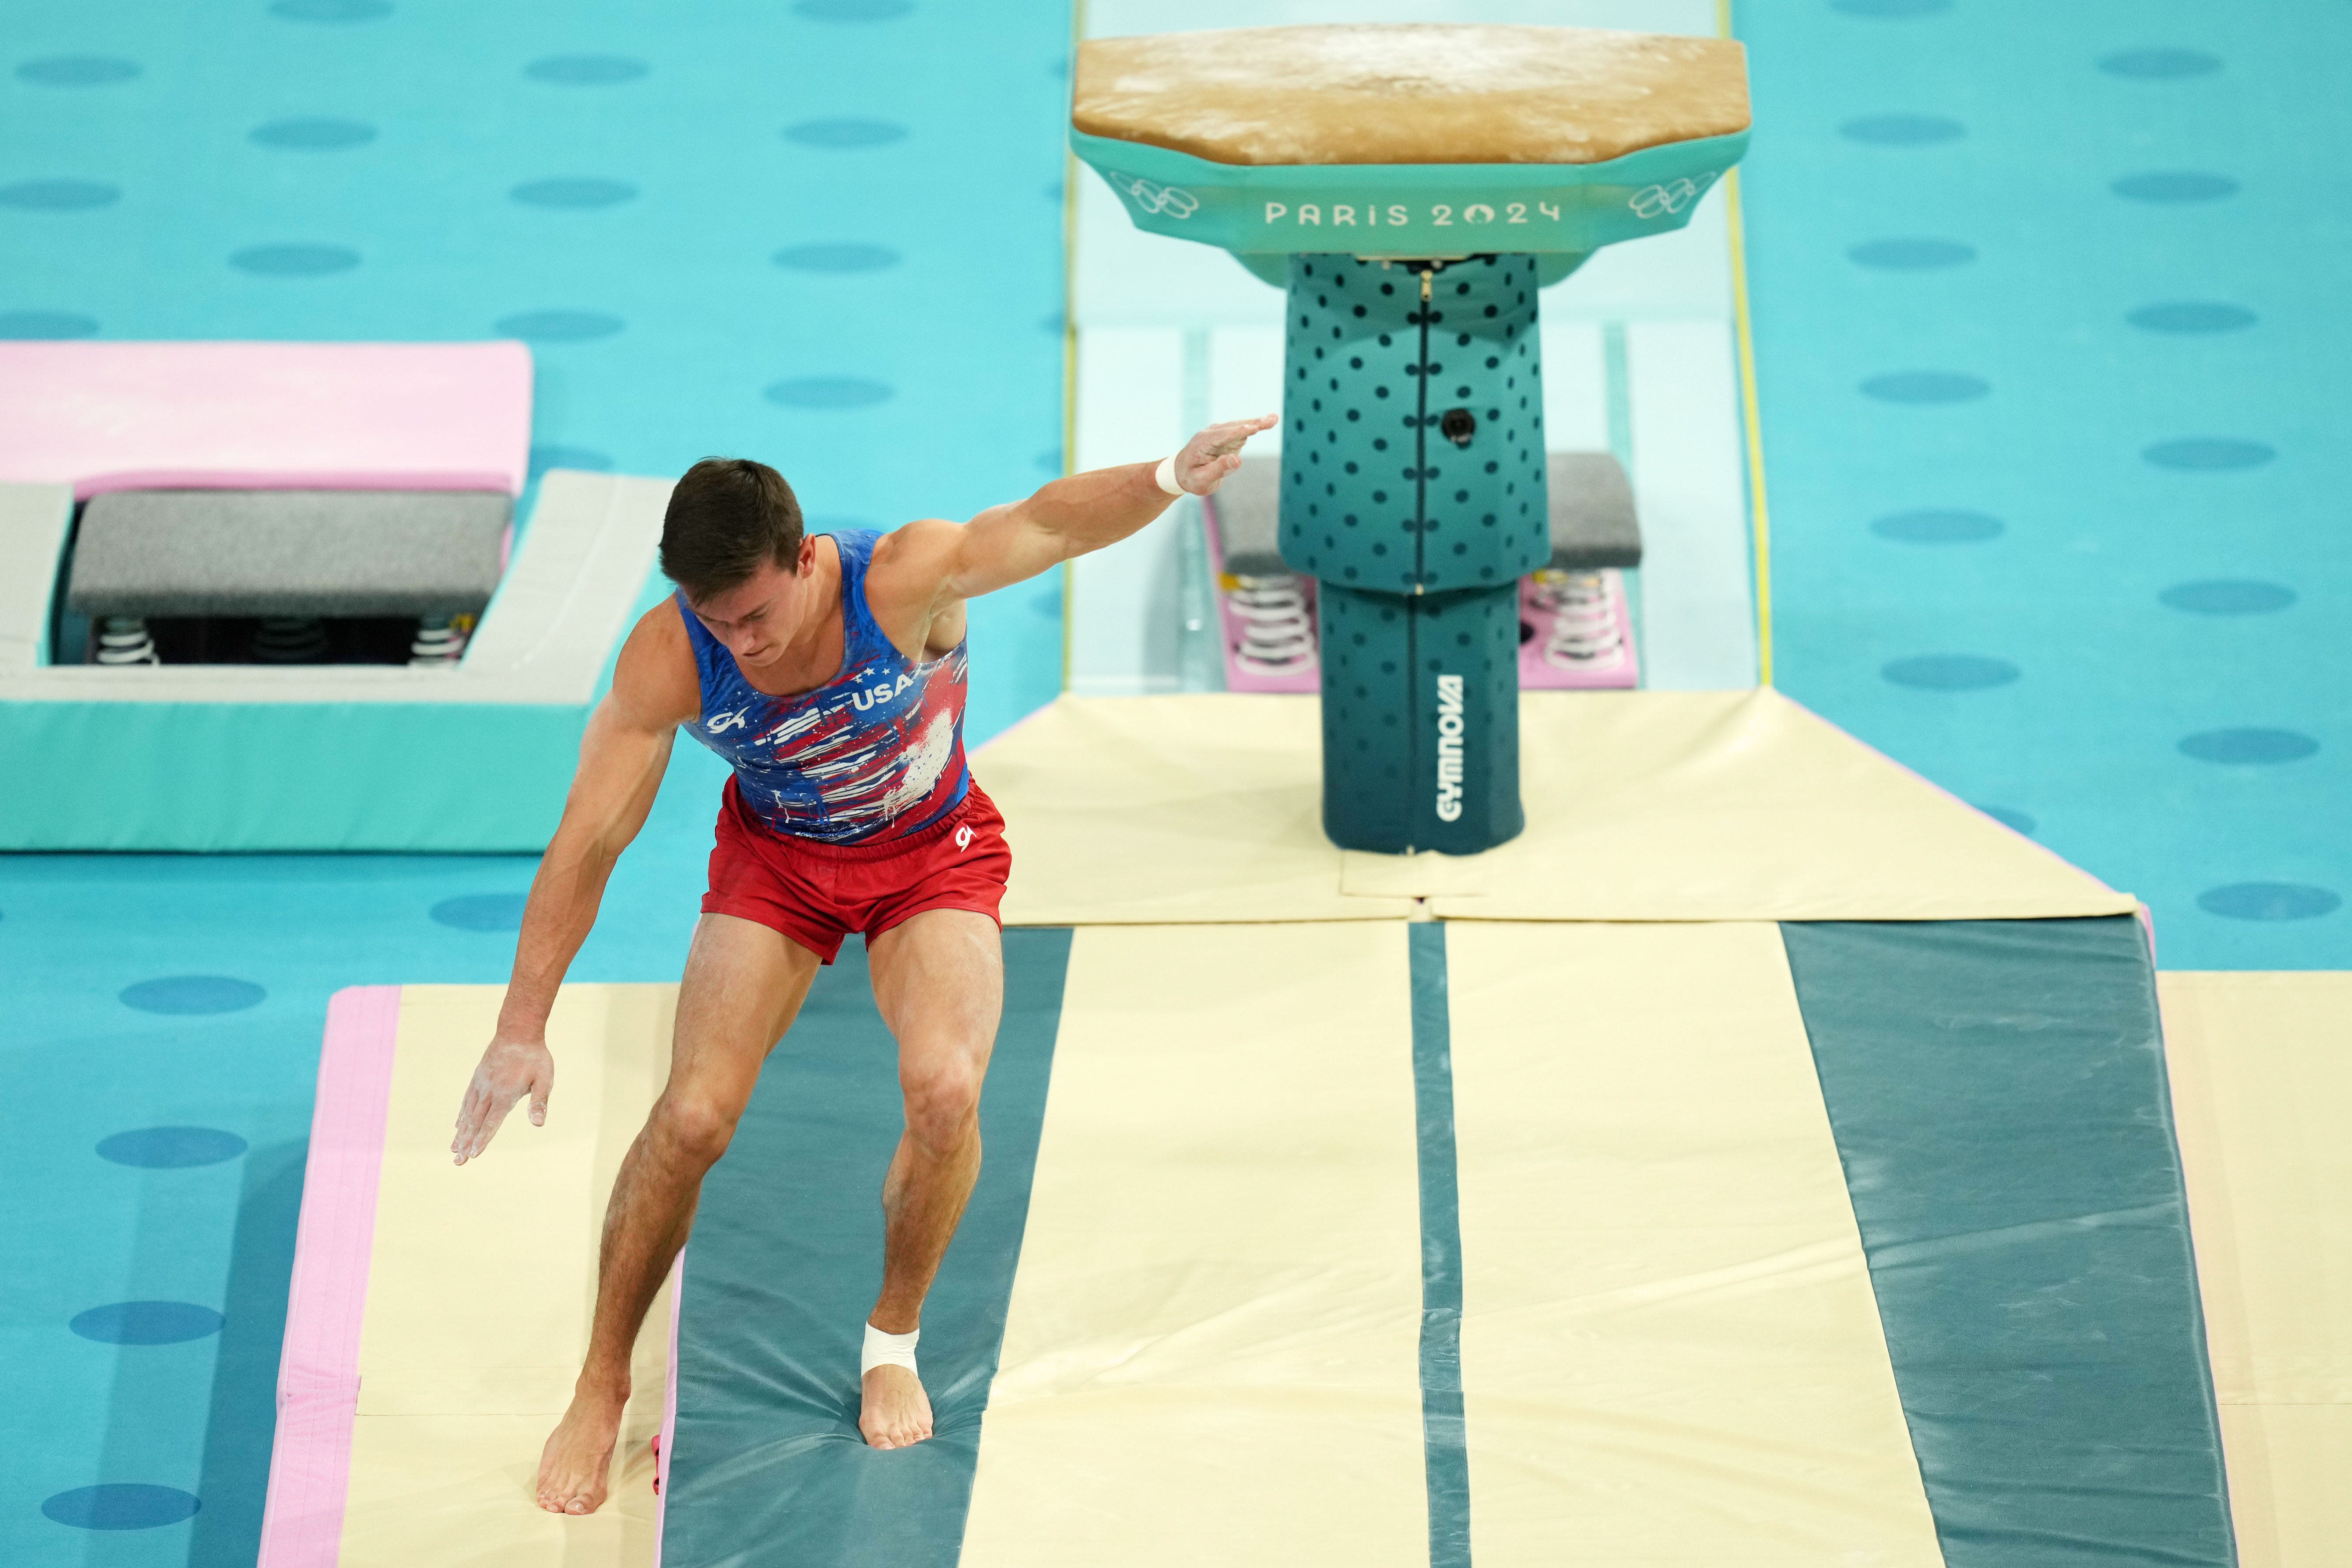 U.S. gymnastics' Brody Malone misses out on Olympic all-around final in a big surprise